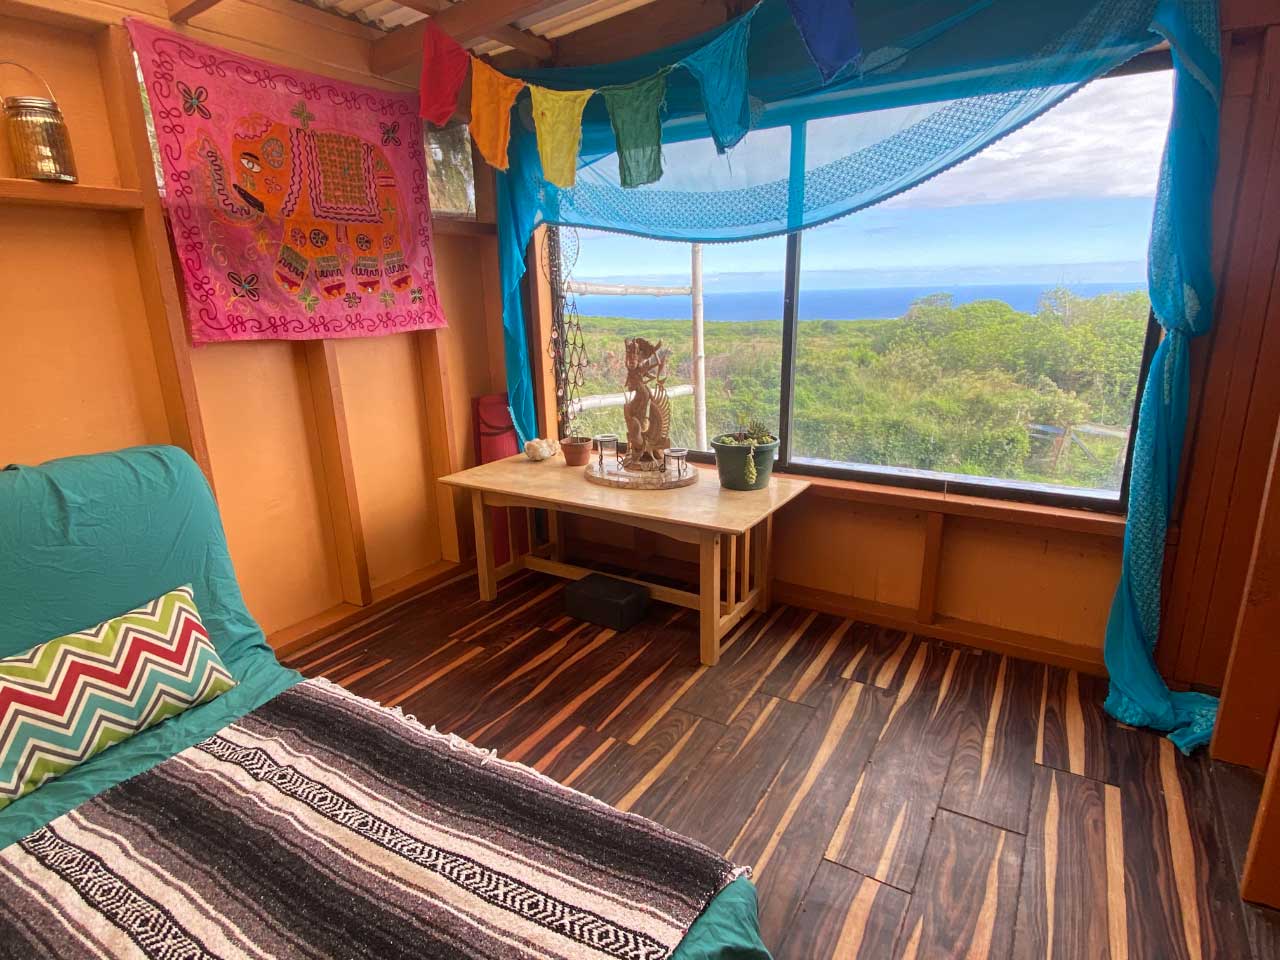 Meditation Nook View Looking Out